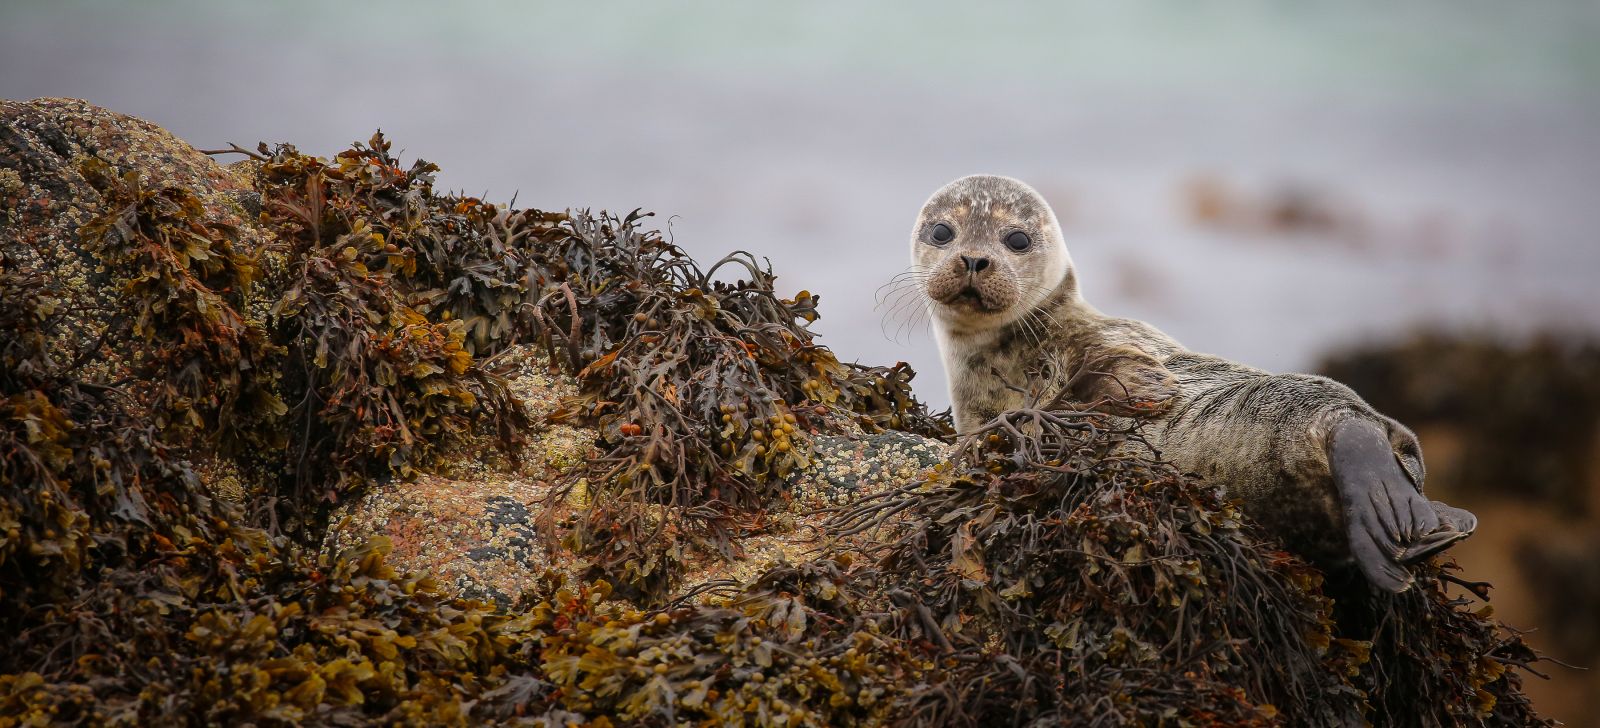 Baby seal resting on tocks banner image